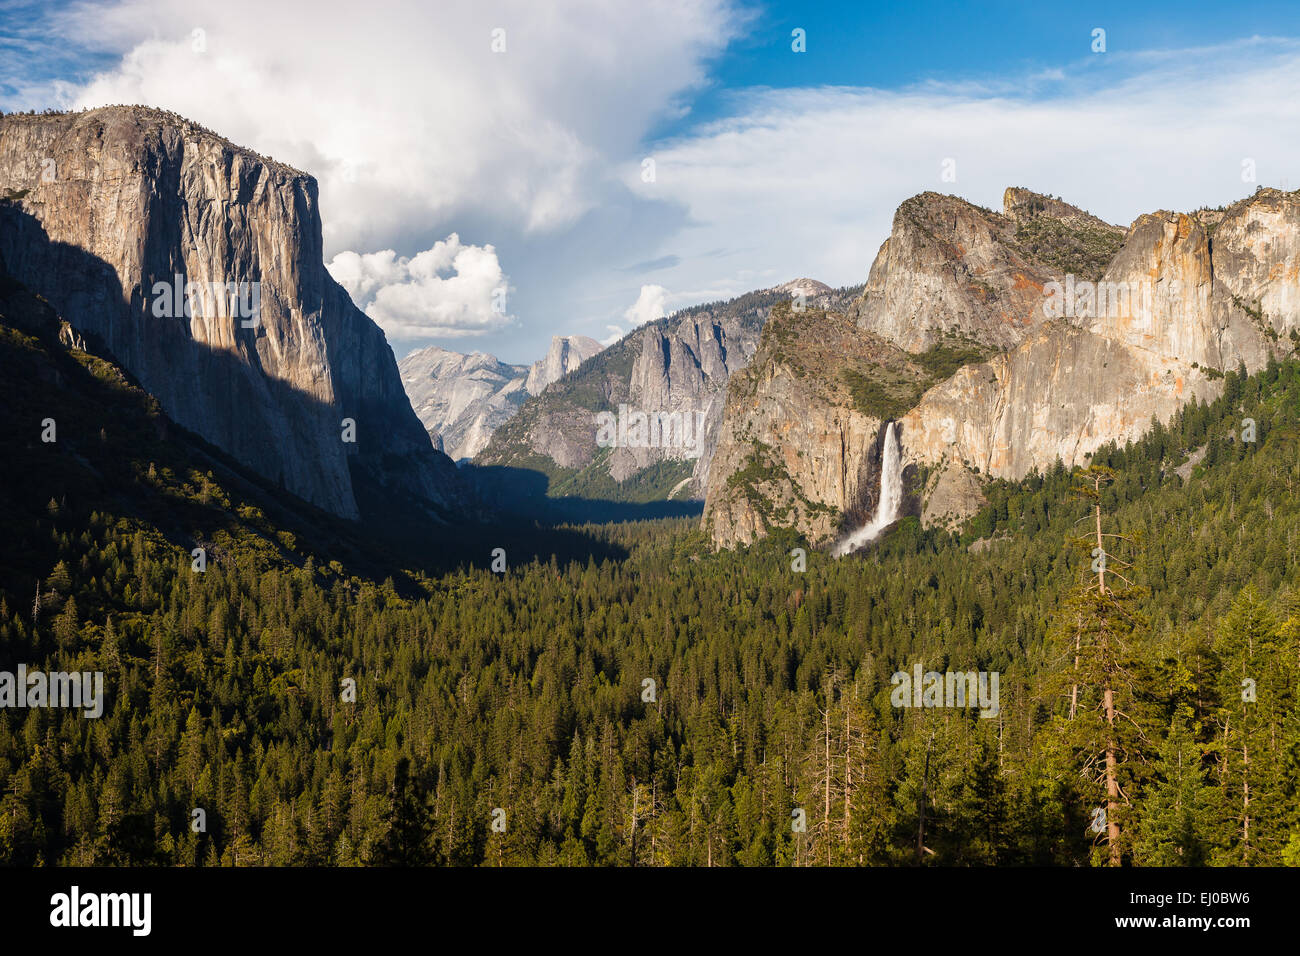 Yosemite Valley from Tunnel View Point, Yosemite National Park, California, United States of America. Stock Photo